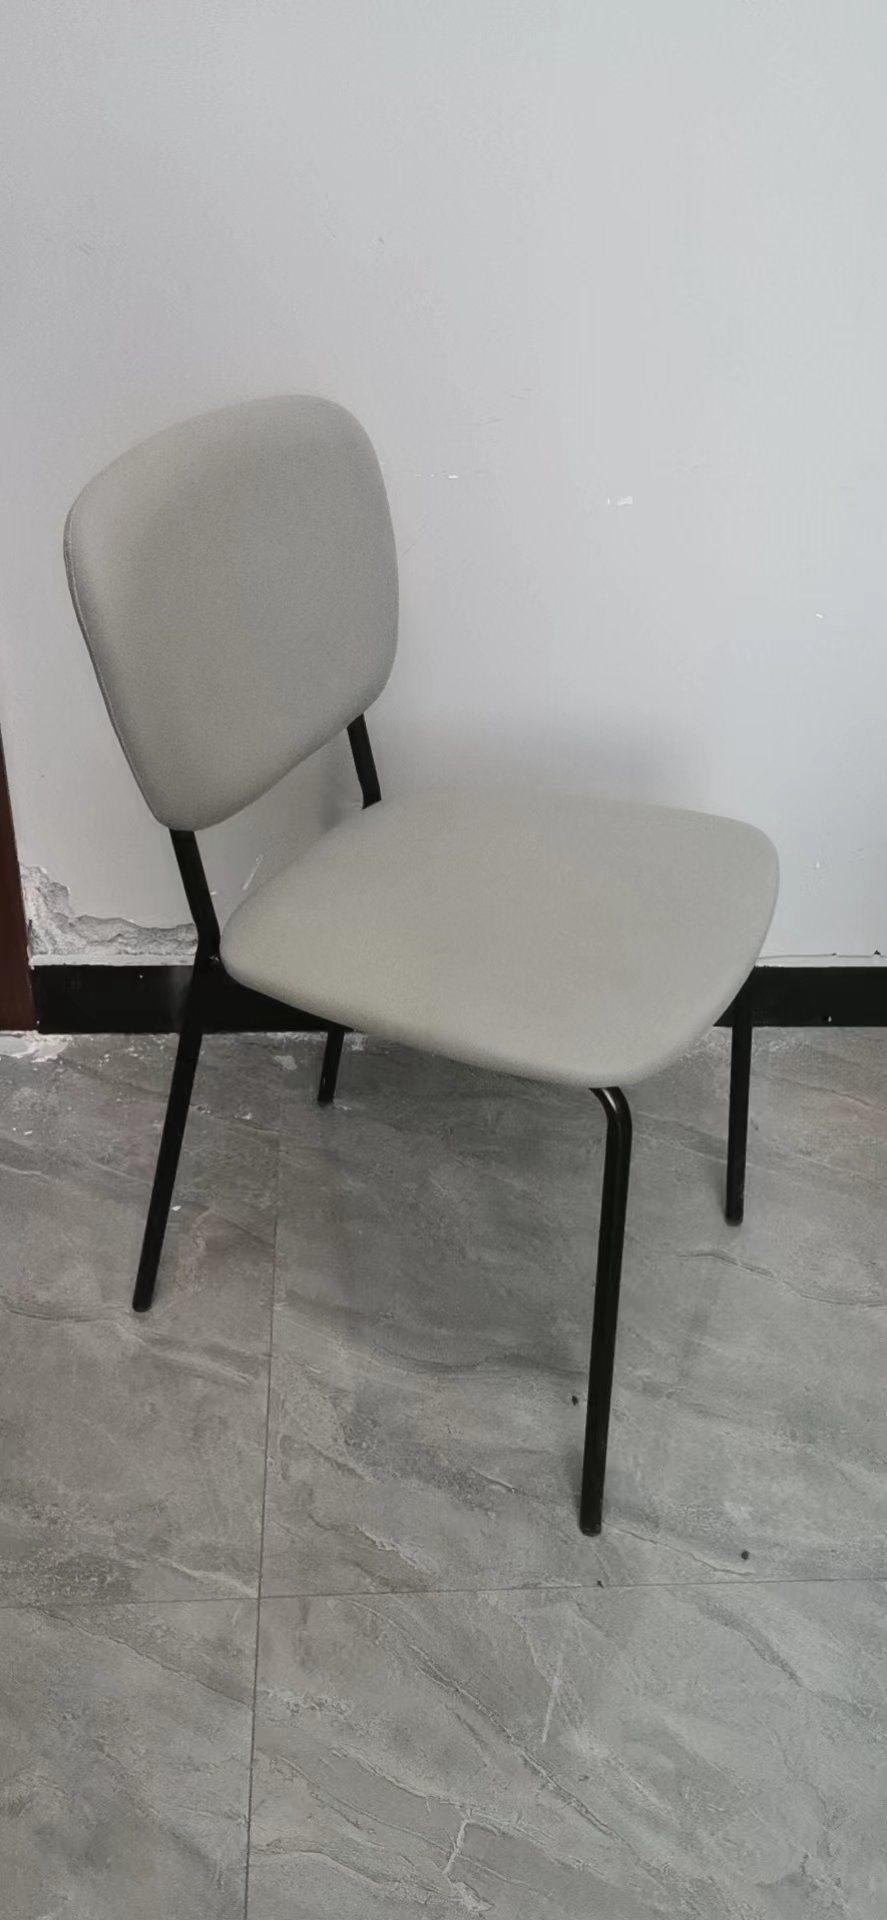 Free Sample Dining Room Furniture Metal Frame Silla Home Leisure Dining Chairs